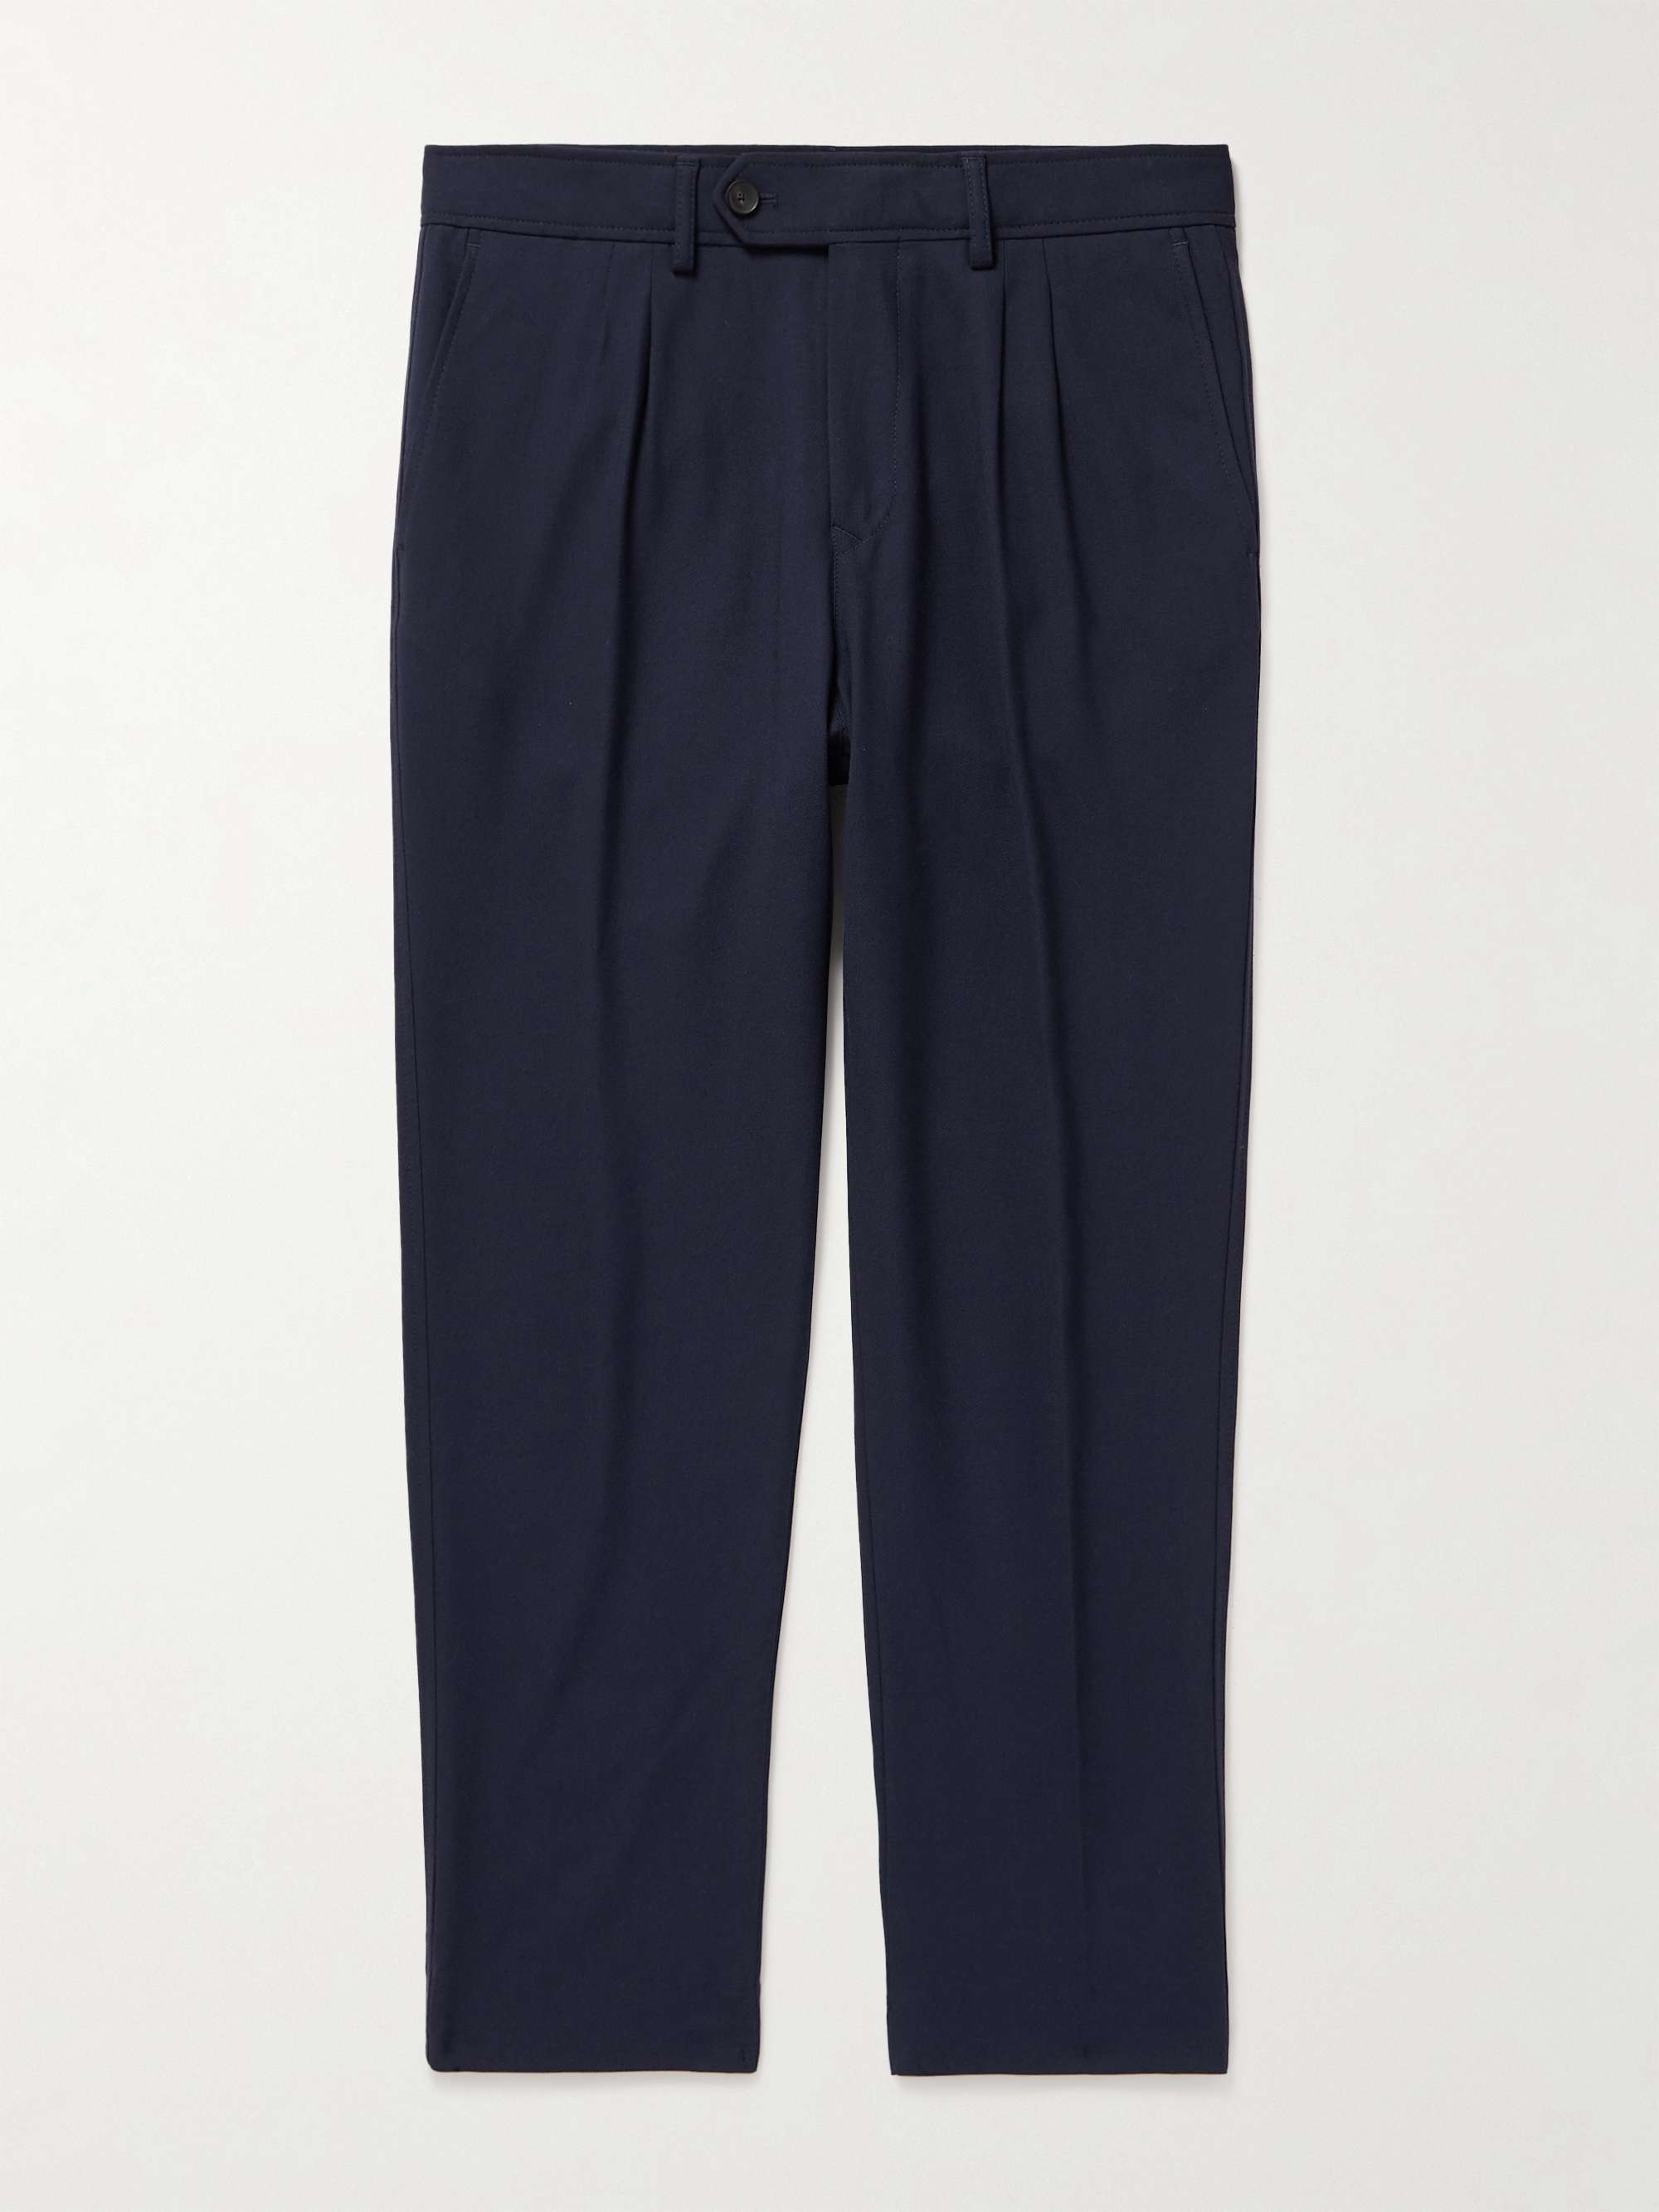 MR P. Tapered Pleated Woven Trousers for Men